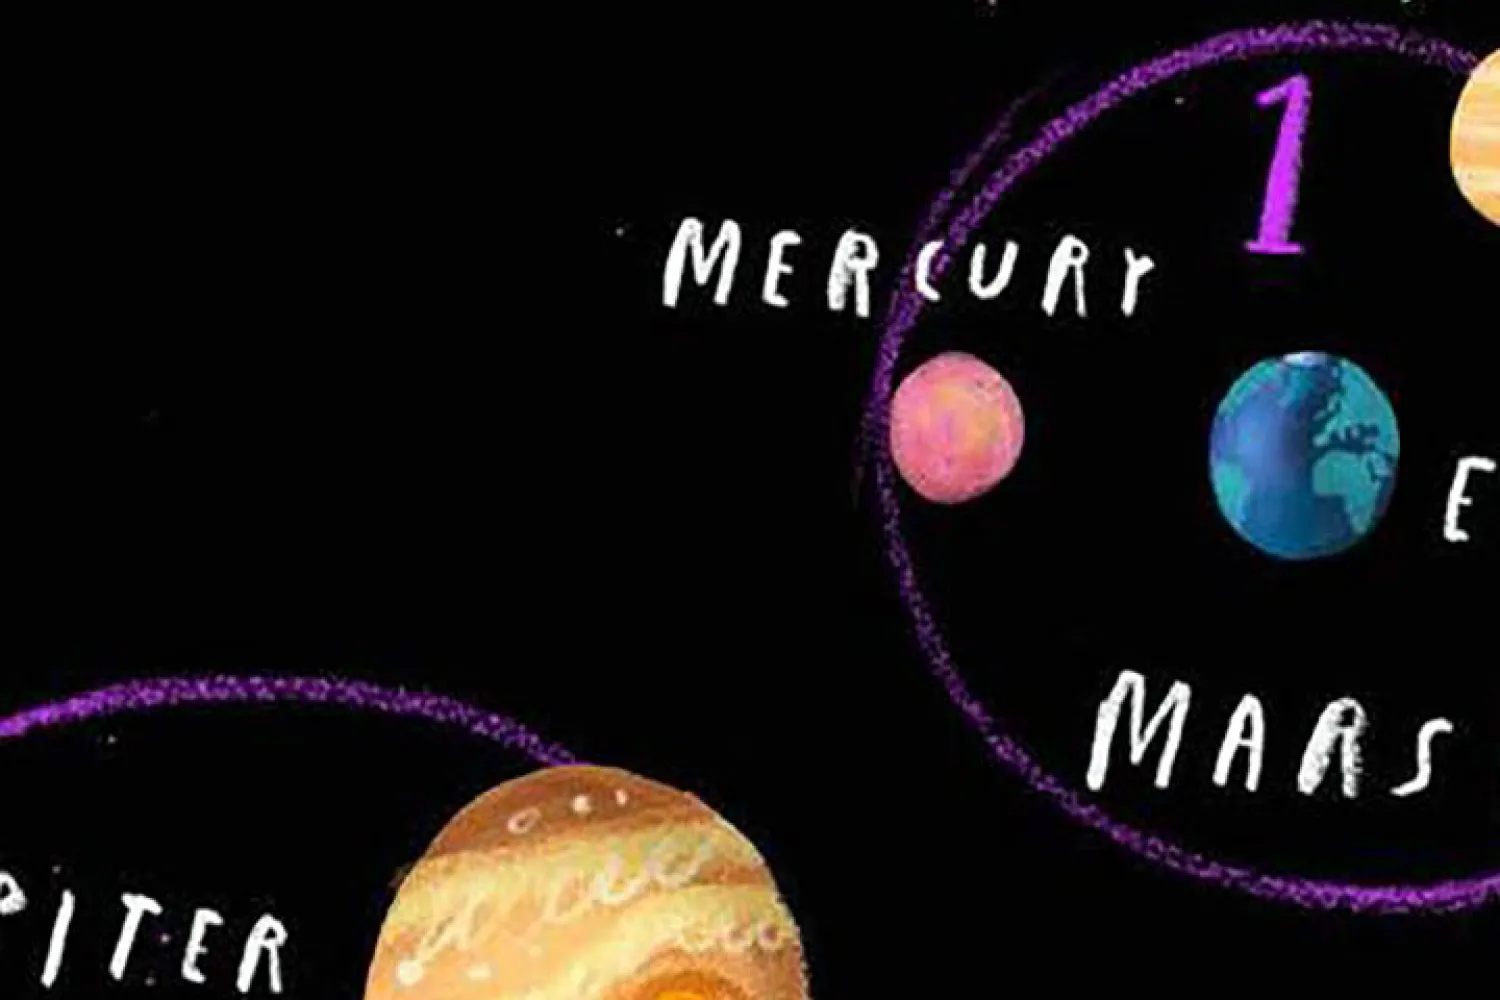 Illustration of the Solar System by Oliver Jeffers